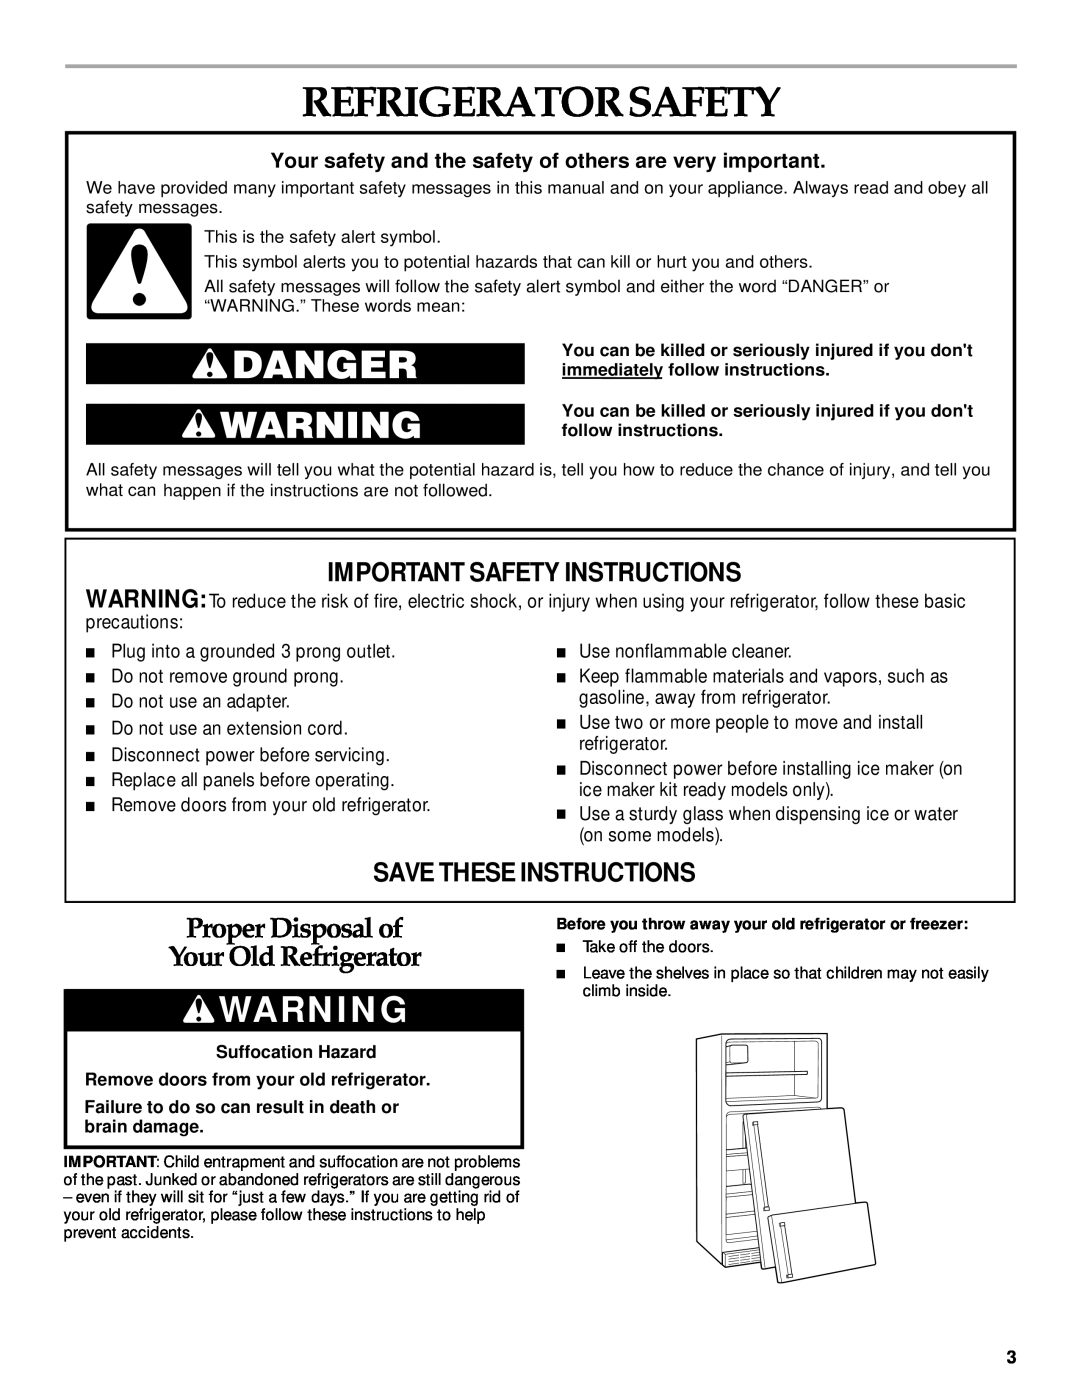 KitchenAid 2205264 manual Refrigeratorsafety, Proper Disposal of Your Old Refrigerator, Important Safety Instructions 